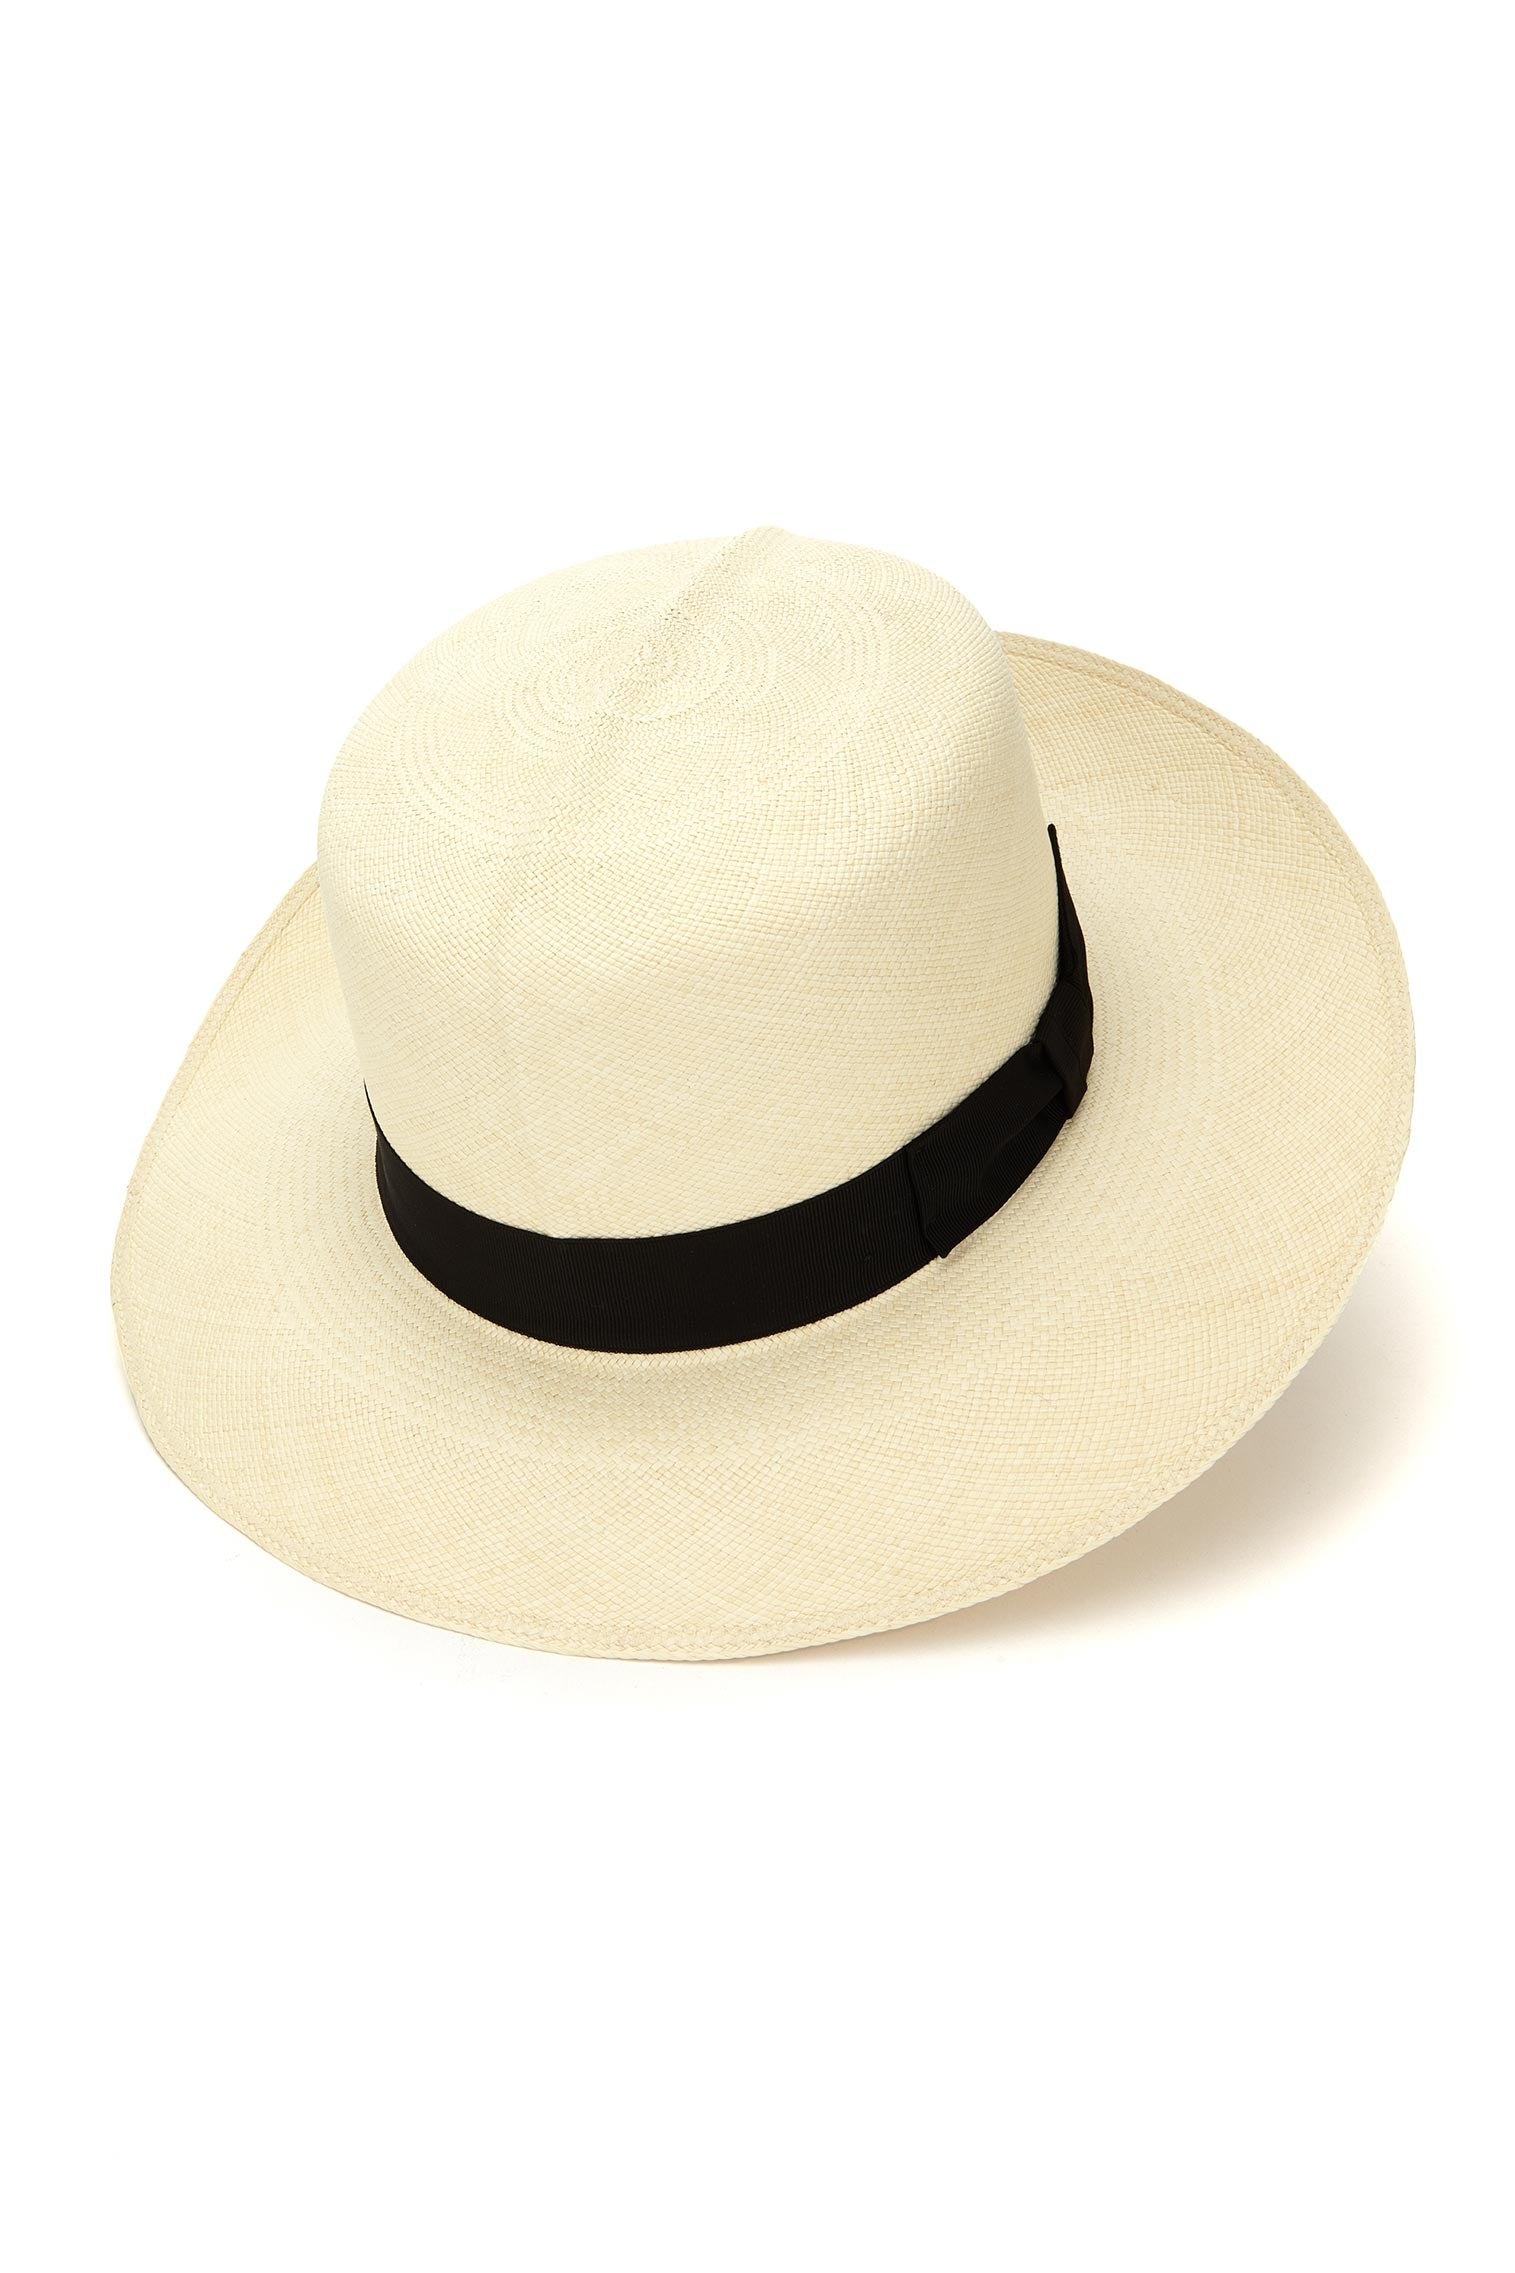 Rollable Superfino Montecristi Panama - Hats for Tall People - Lock & Co. Hatters London UK